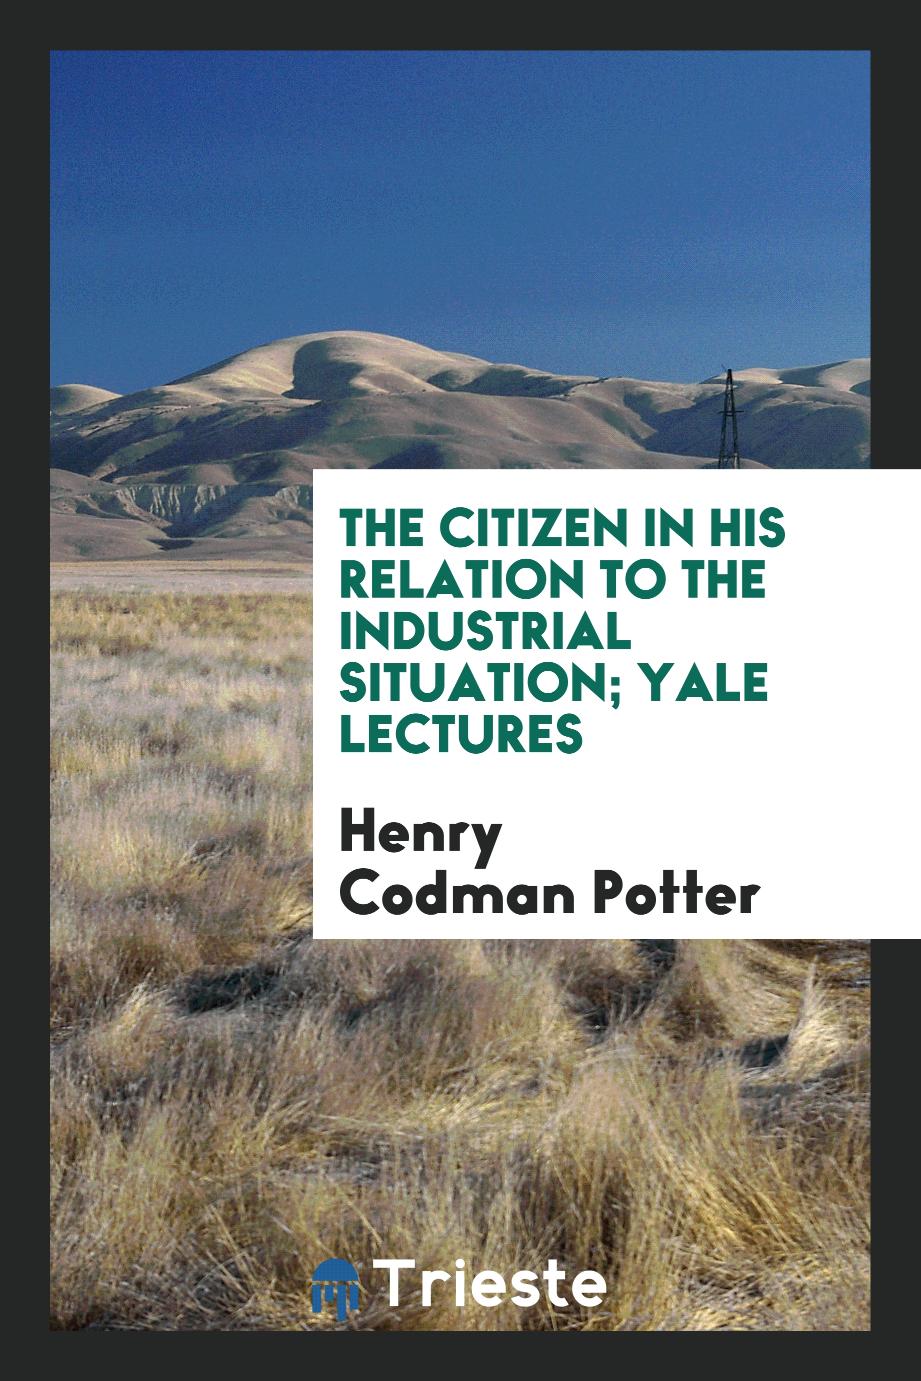 The citizen in his relation to the industrial situation; Yale lectures